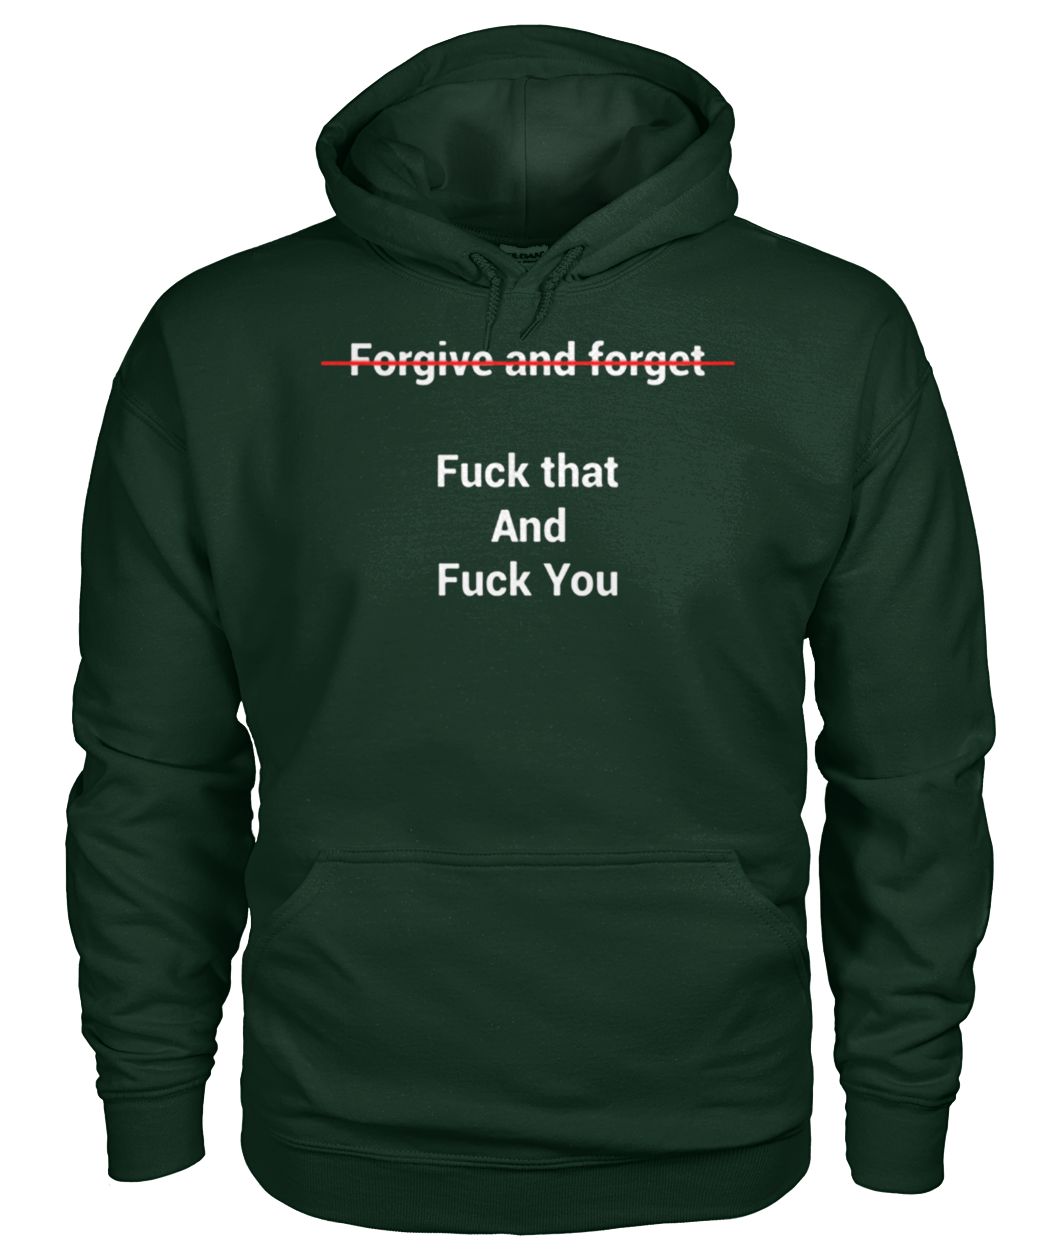 Forgive and forget fuck that and fuck you gildan hoodie